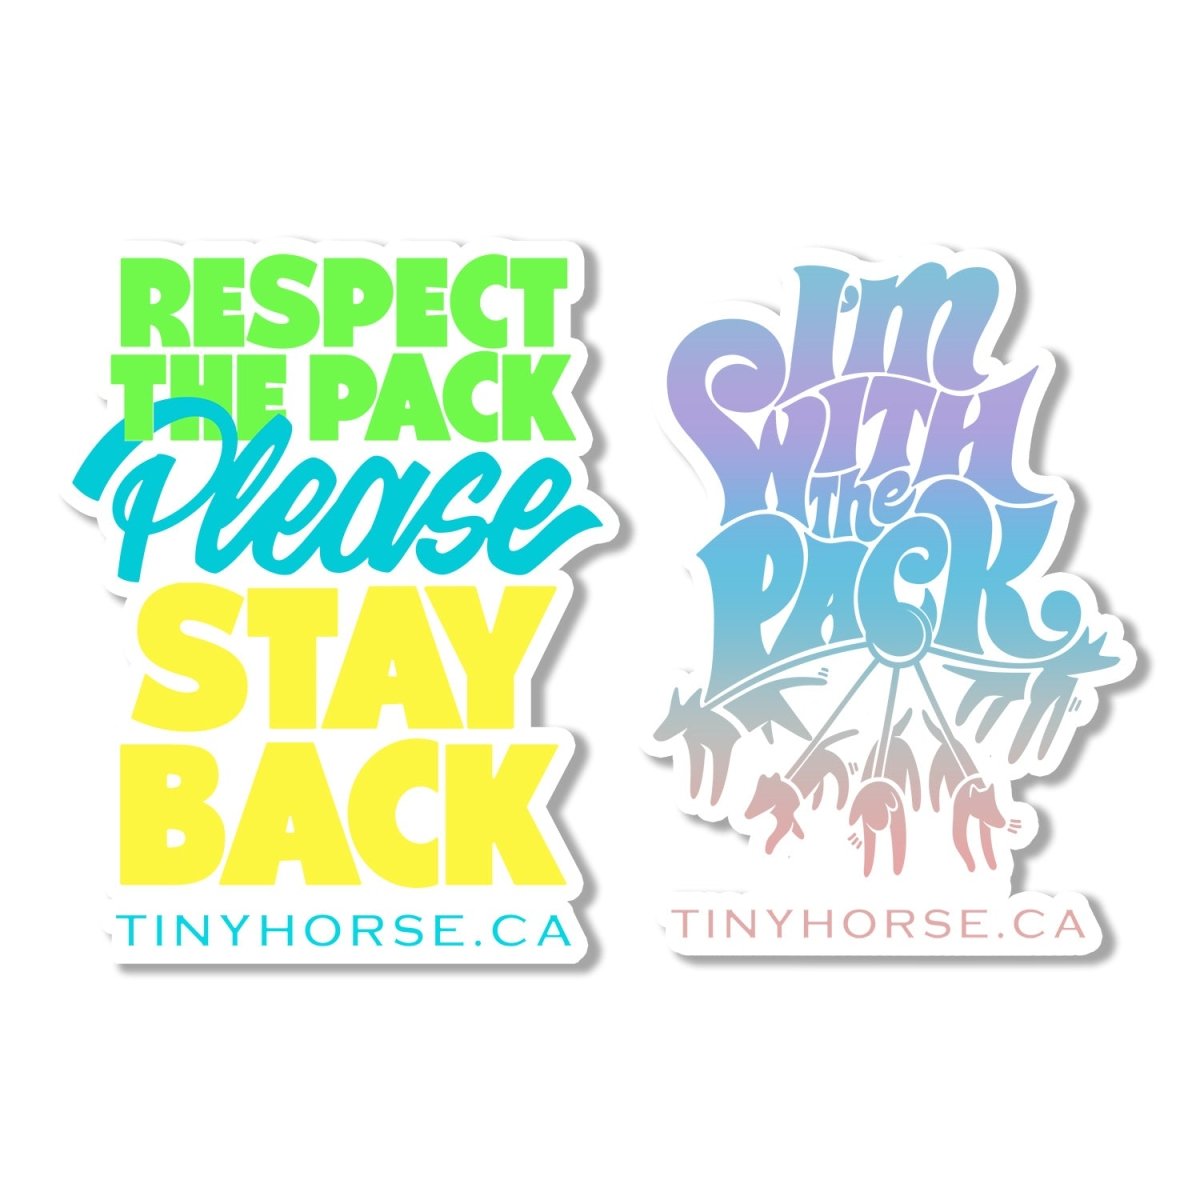 Removable vinyl Dog Walker Lifestyle Stickers side by side in a 2 Pack